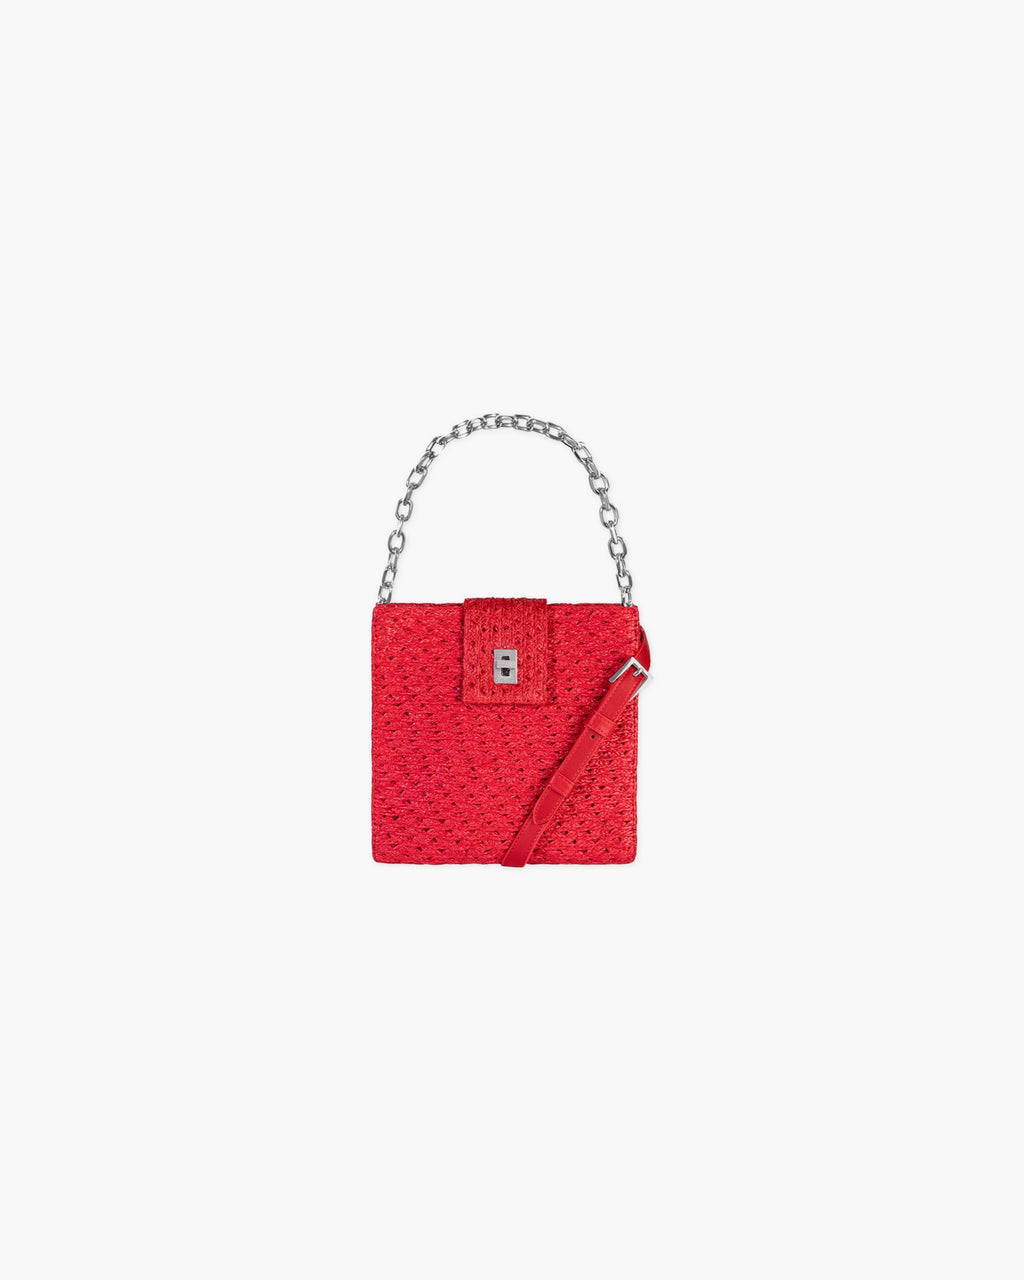 Gucci Pre-Fall 2019 Bag Collection Features Raffia and Straw Bags